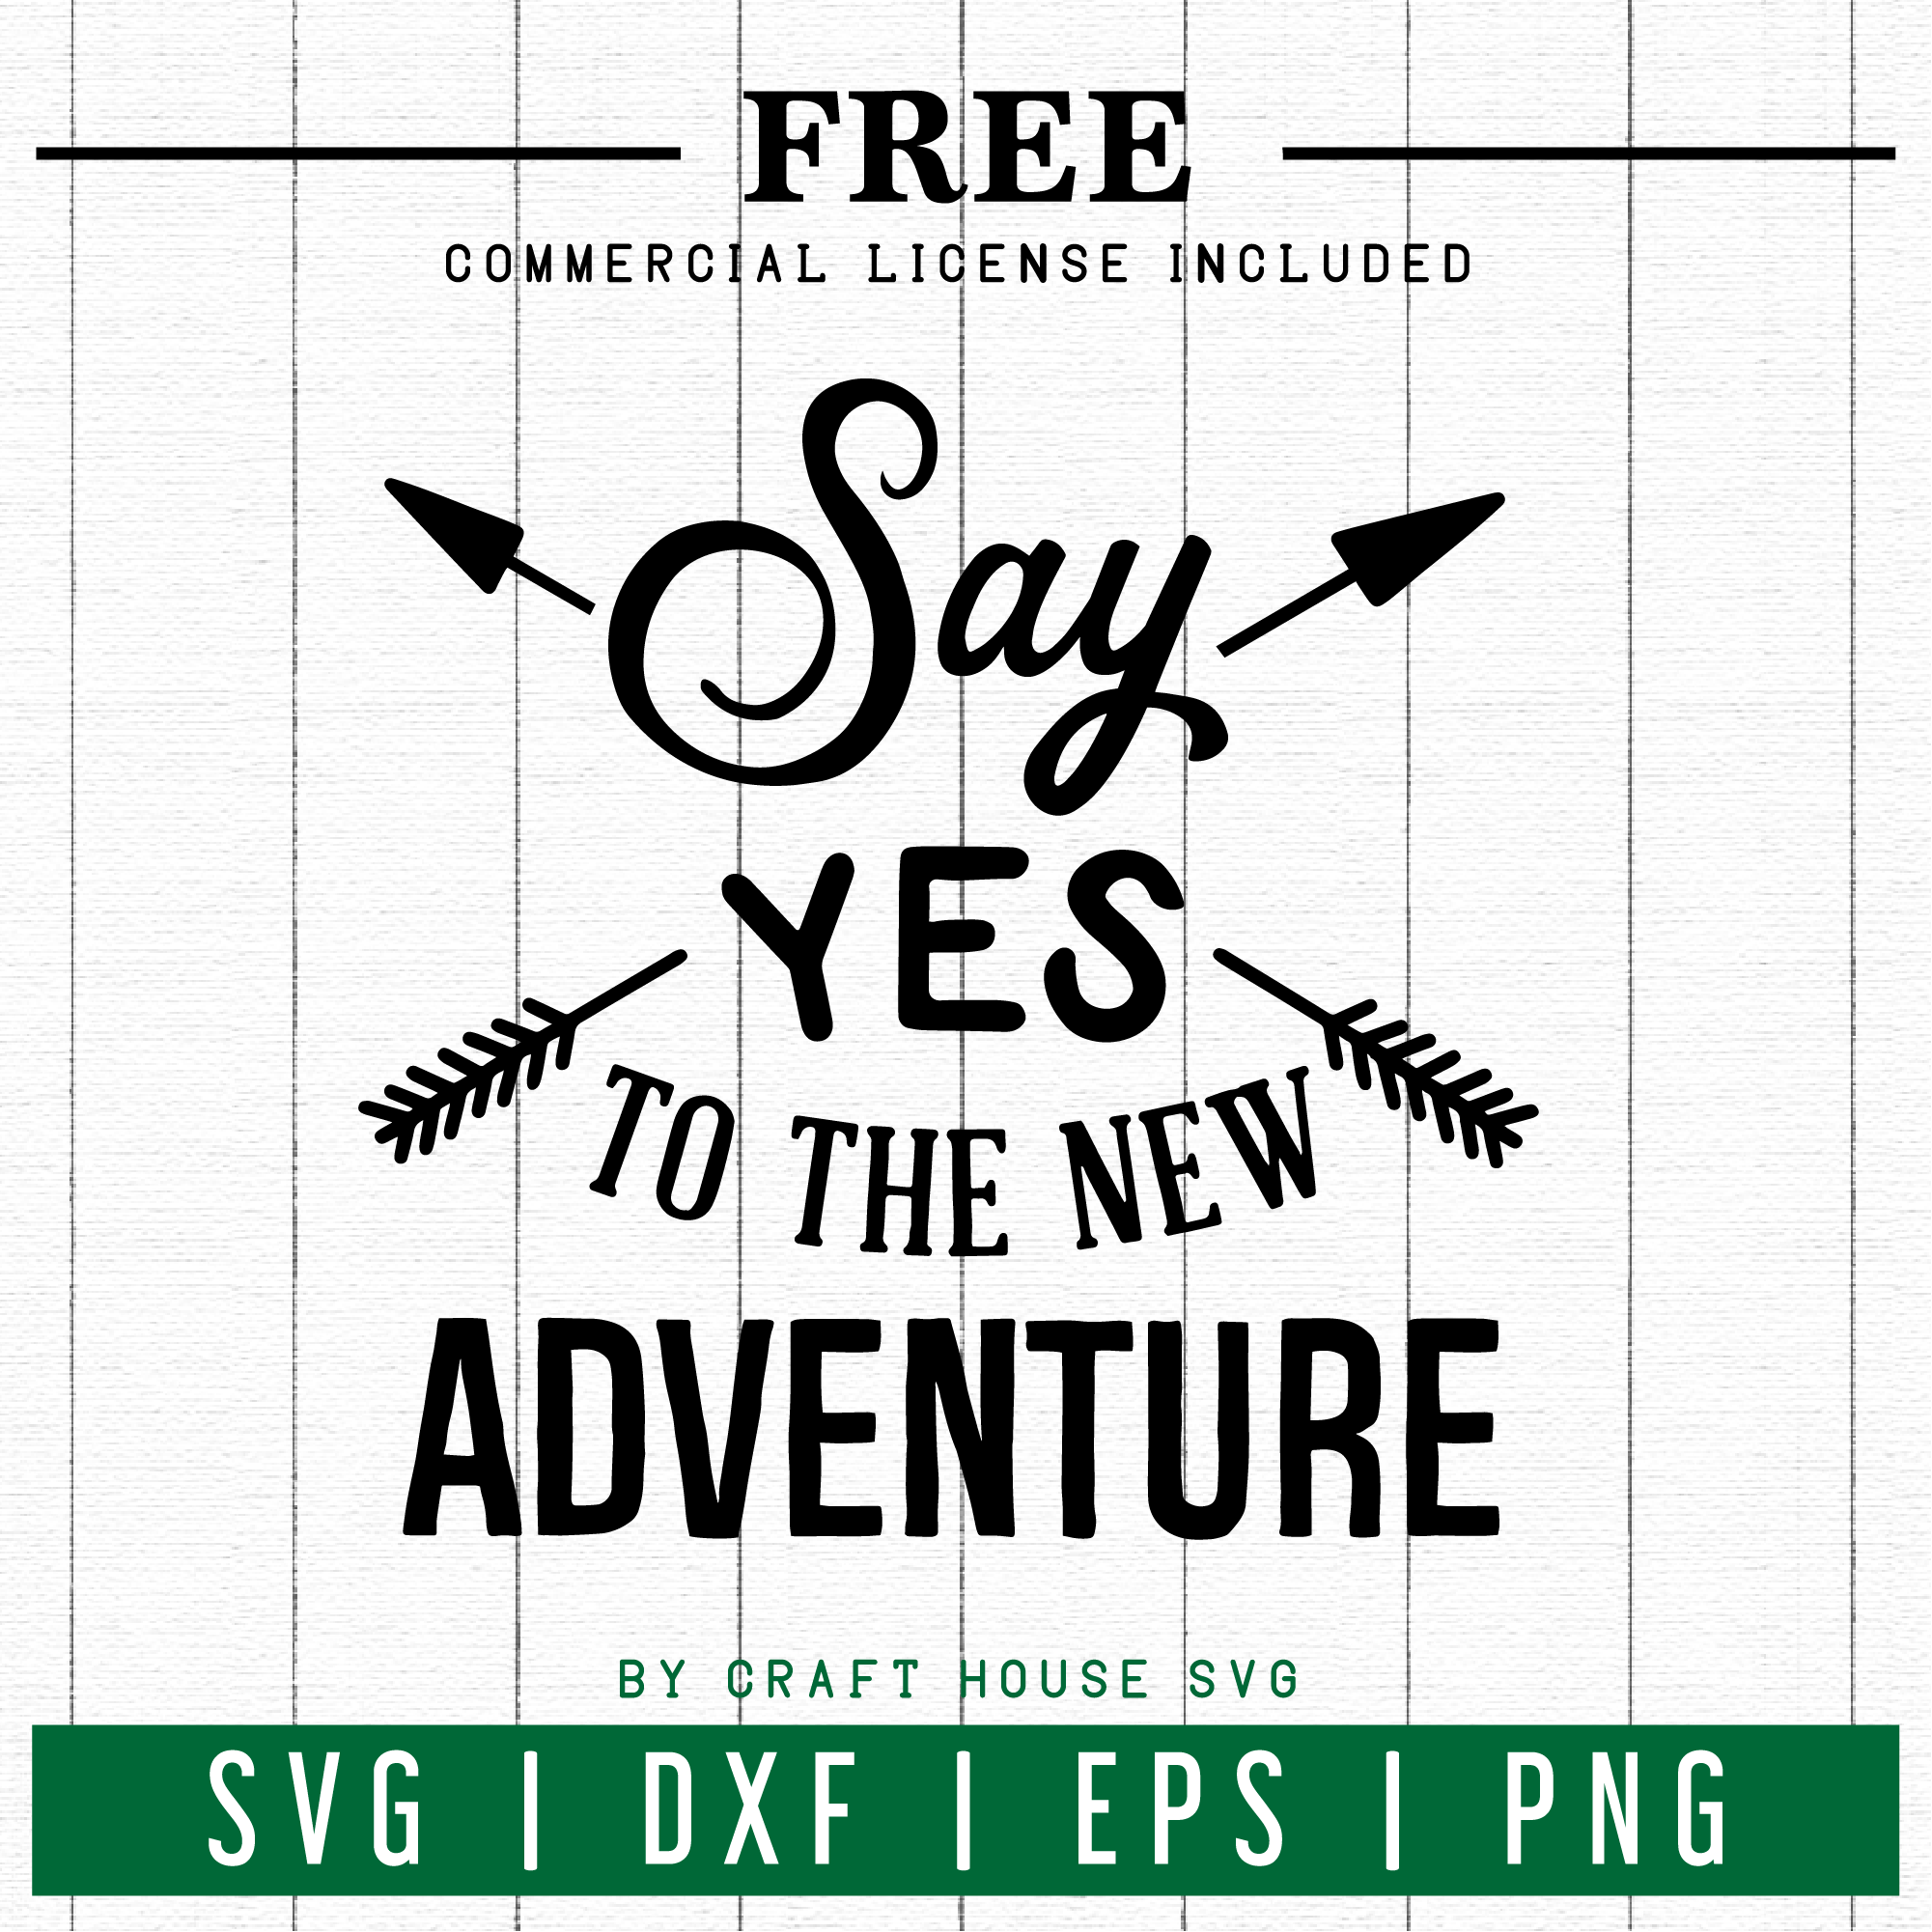 FREE | Say yes to the new adventure SVG | FB22 Craft House SVG - SVG files for Cricut and Silhouette